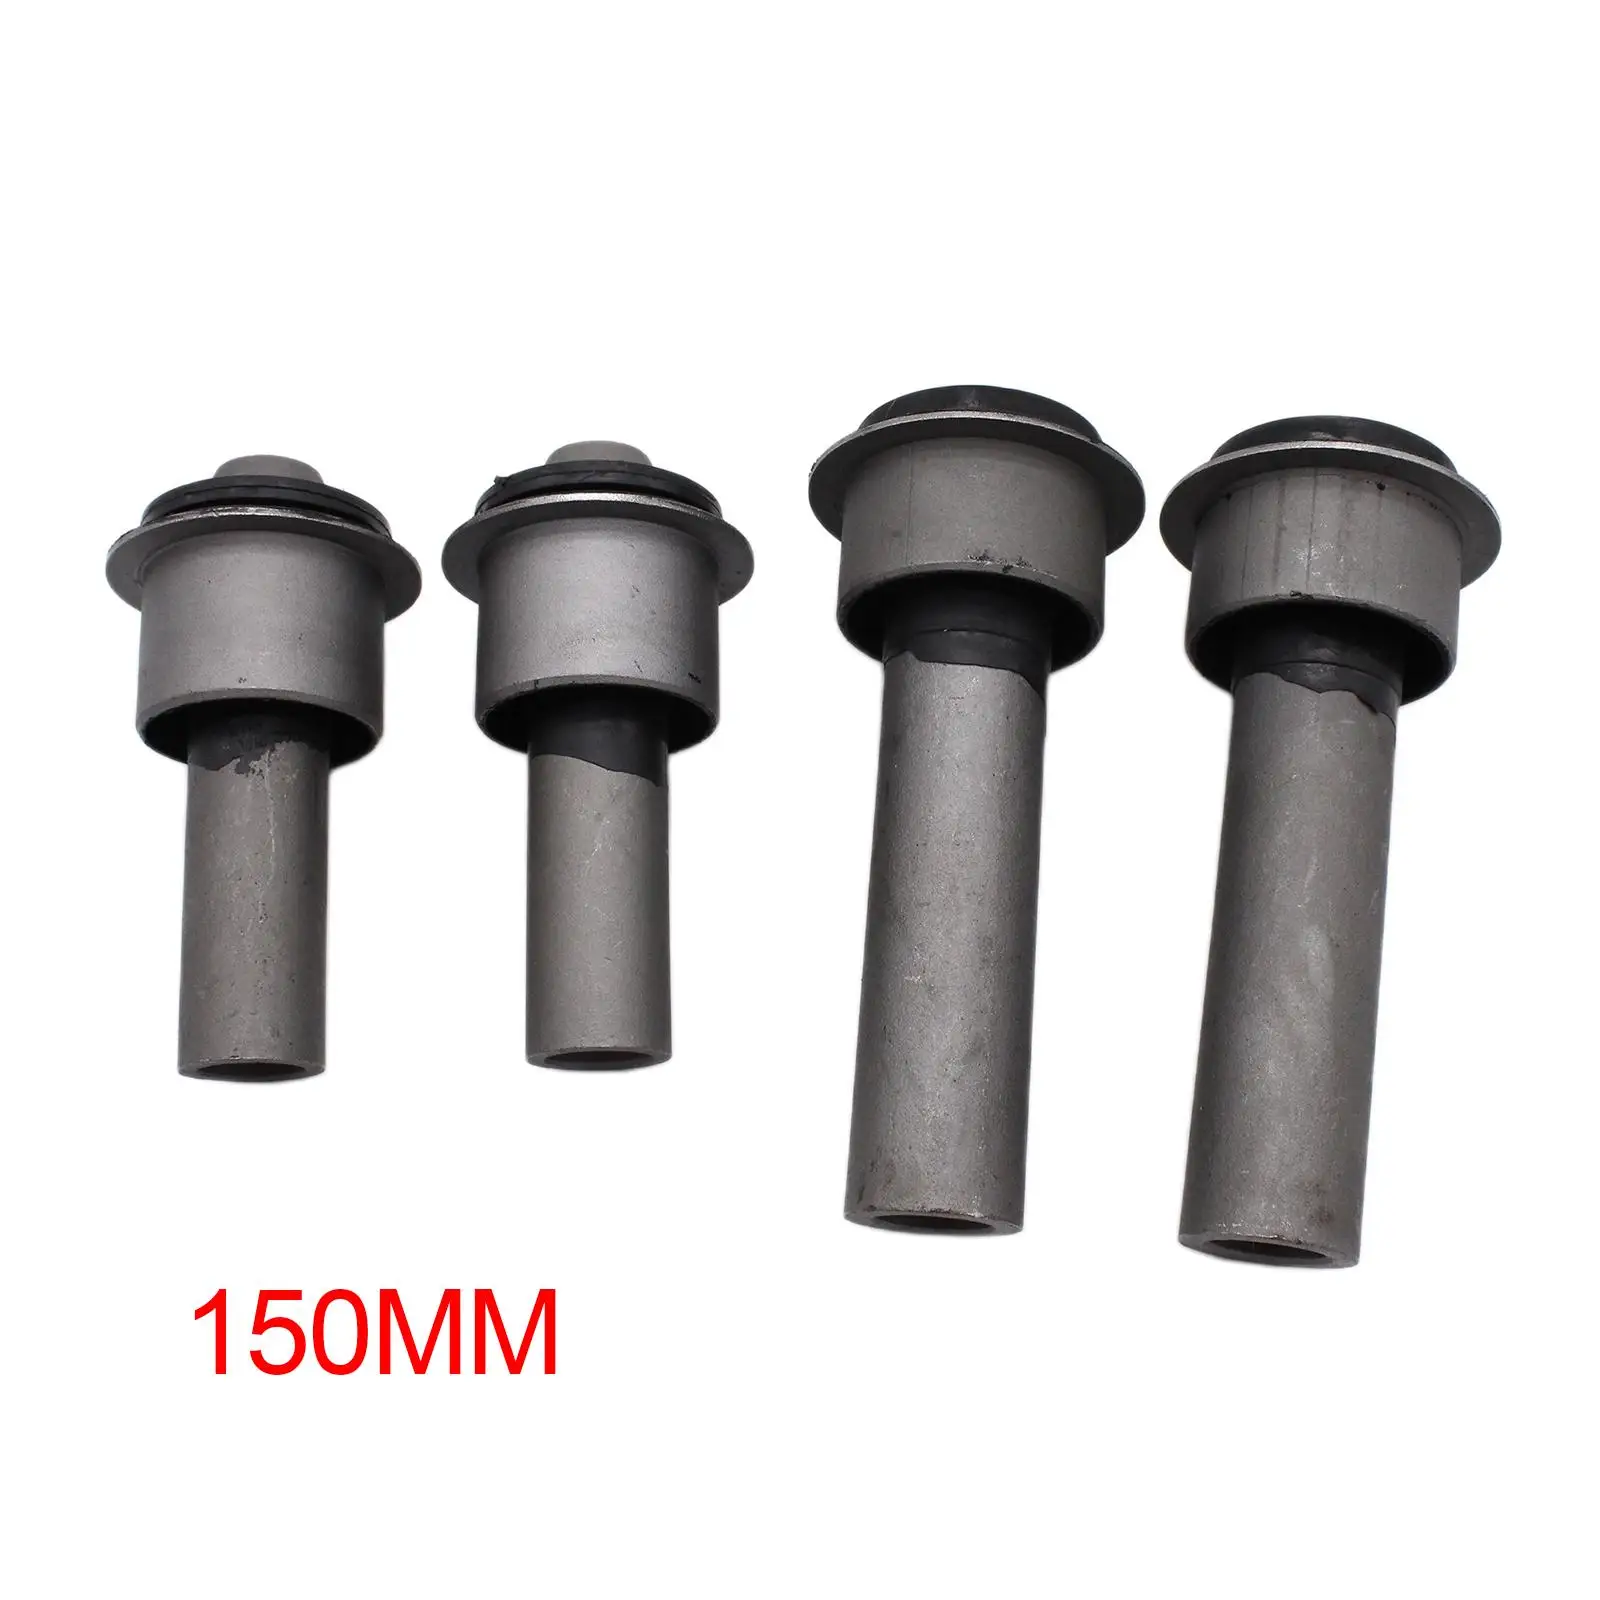 4Pcs Subframe Bushes Set 54467-Jd00A 54400-Jy20A 54466-Jd000 Replaces Professional Easy to Install Accessory Spare Parts